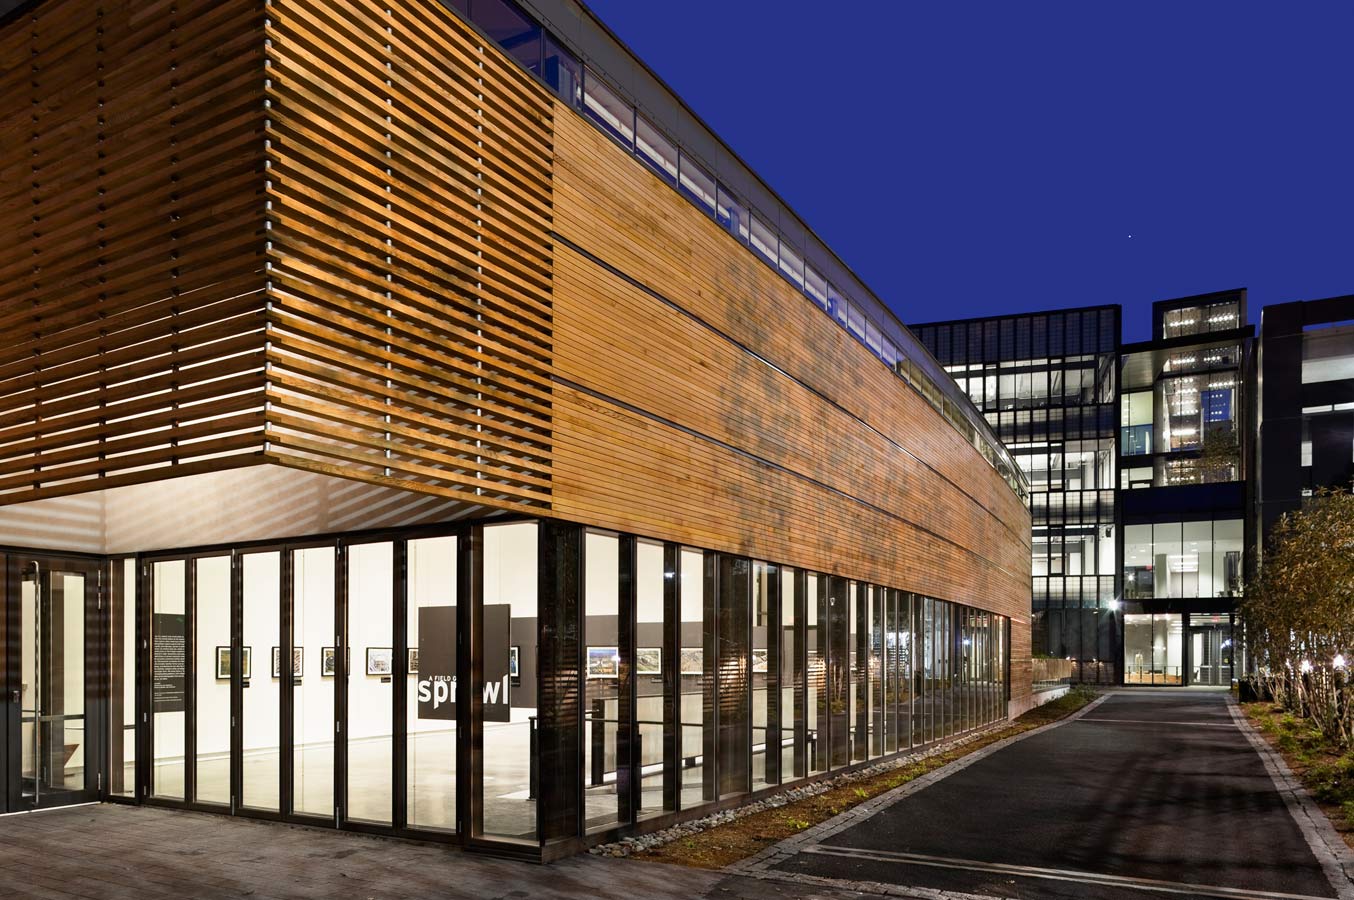 <p>The gallery was extracted from the sculpture building and placed along Edgewood Avenue to engage with the city of New Haven at the edge of campus. The gallery building is clad in glass and reclaimed western red cedar and is designed to blend with the historic houses that line this street. <br><small>&copy; Peter Aaron/OTTO</small></p>